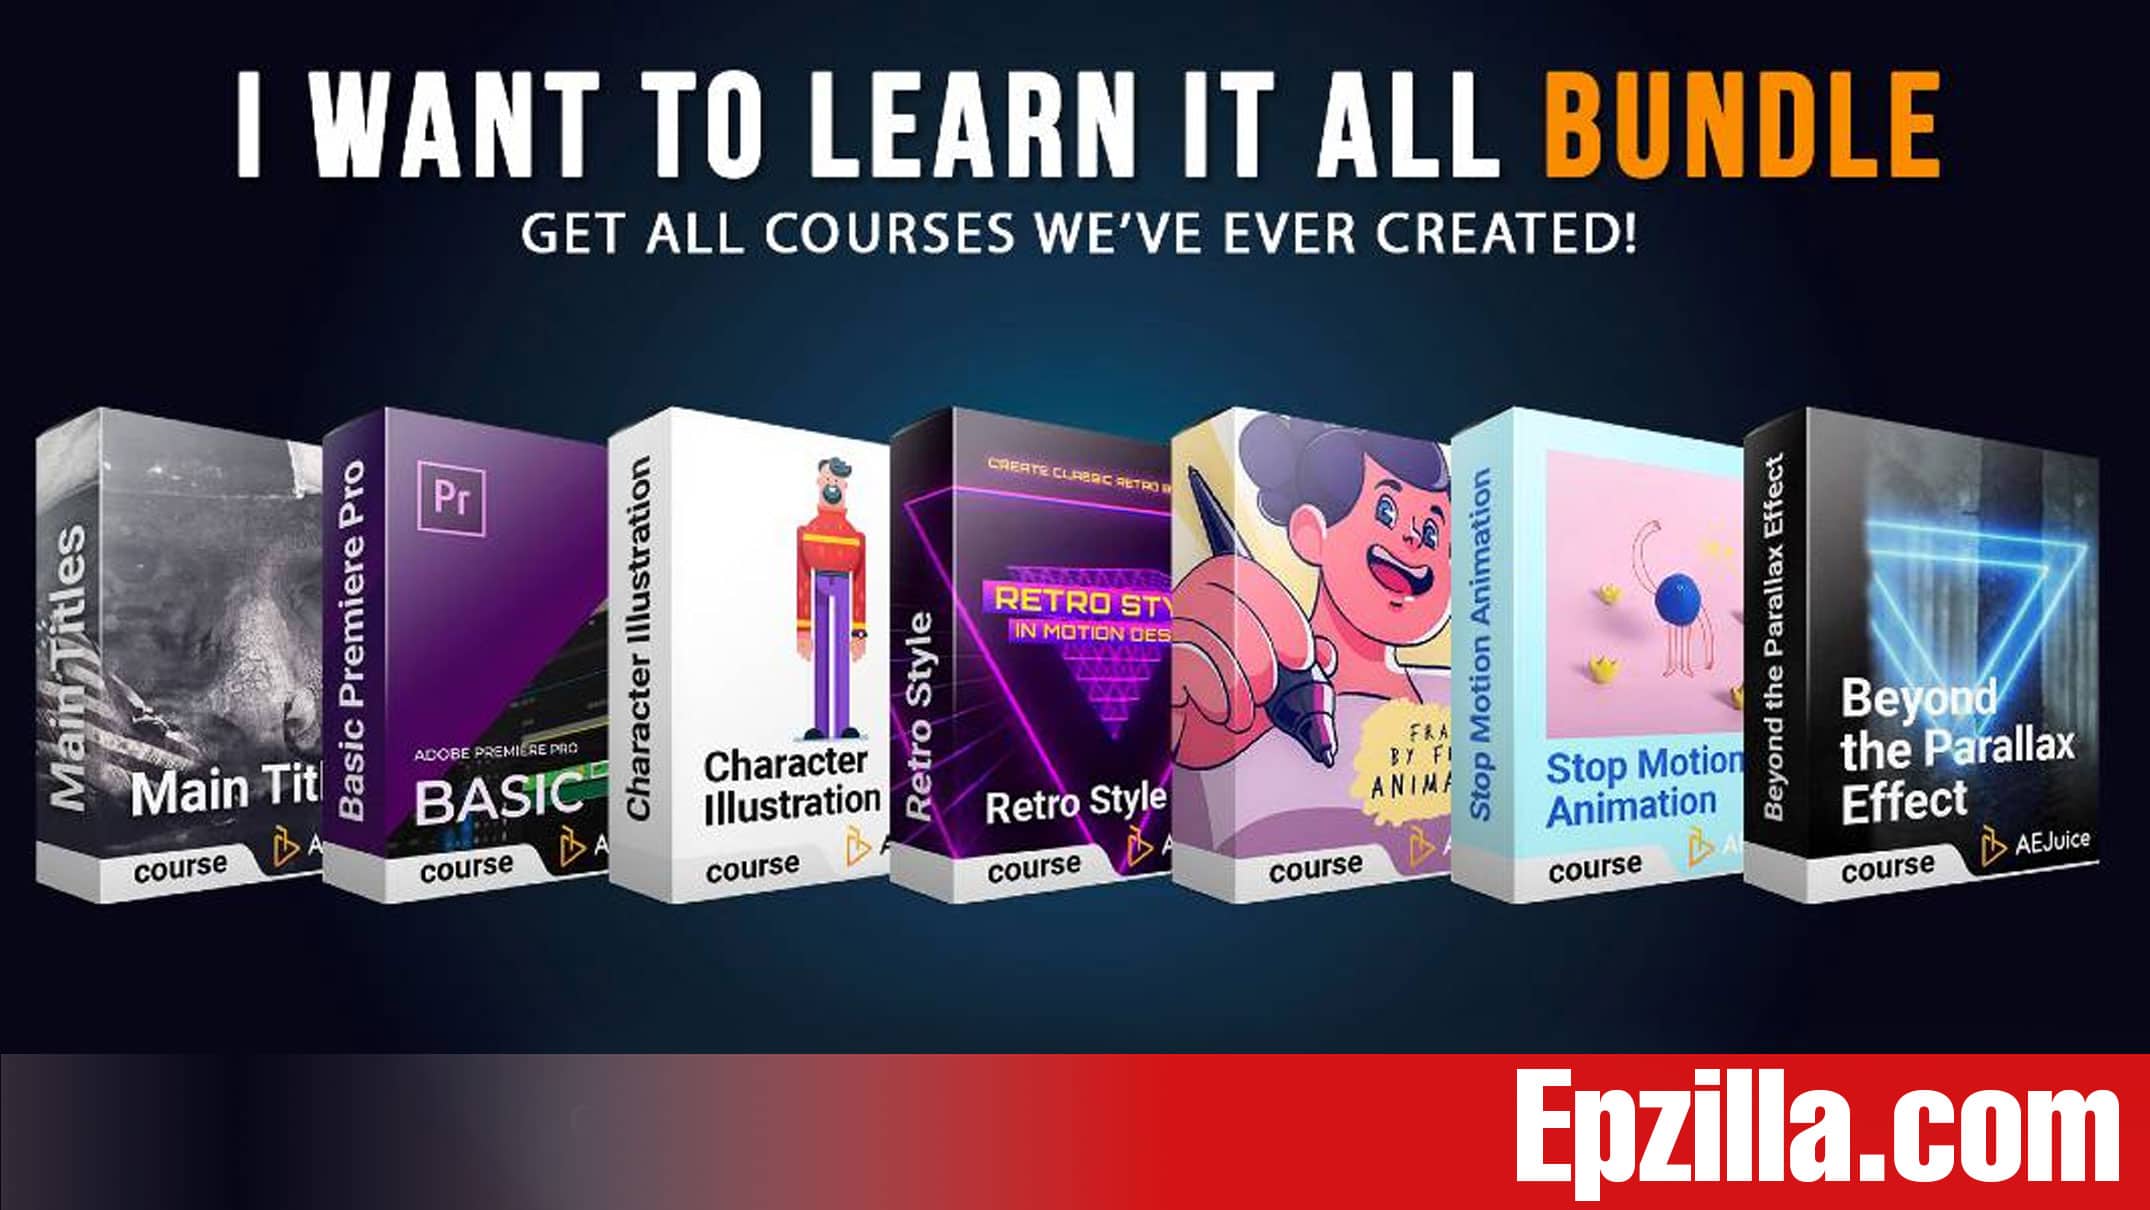 AEJuice I Want To Learn It All Bundle Free Download Epzilla.com